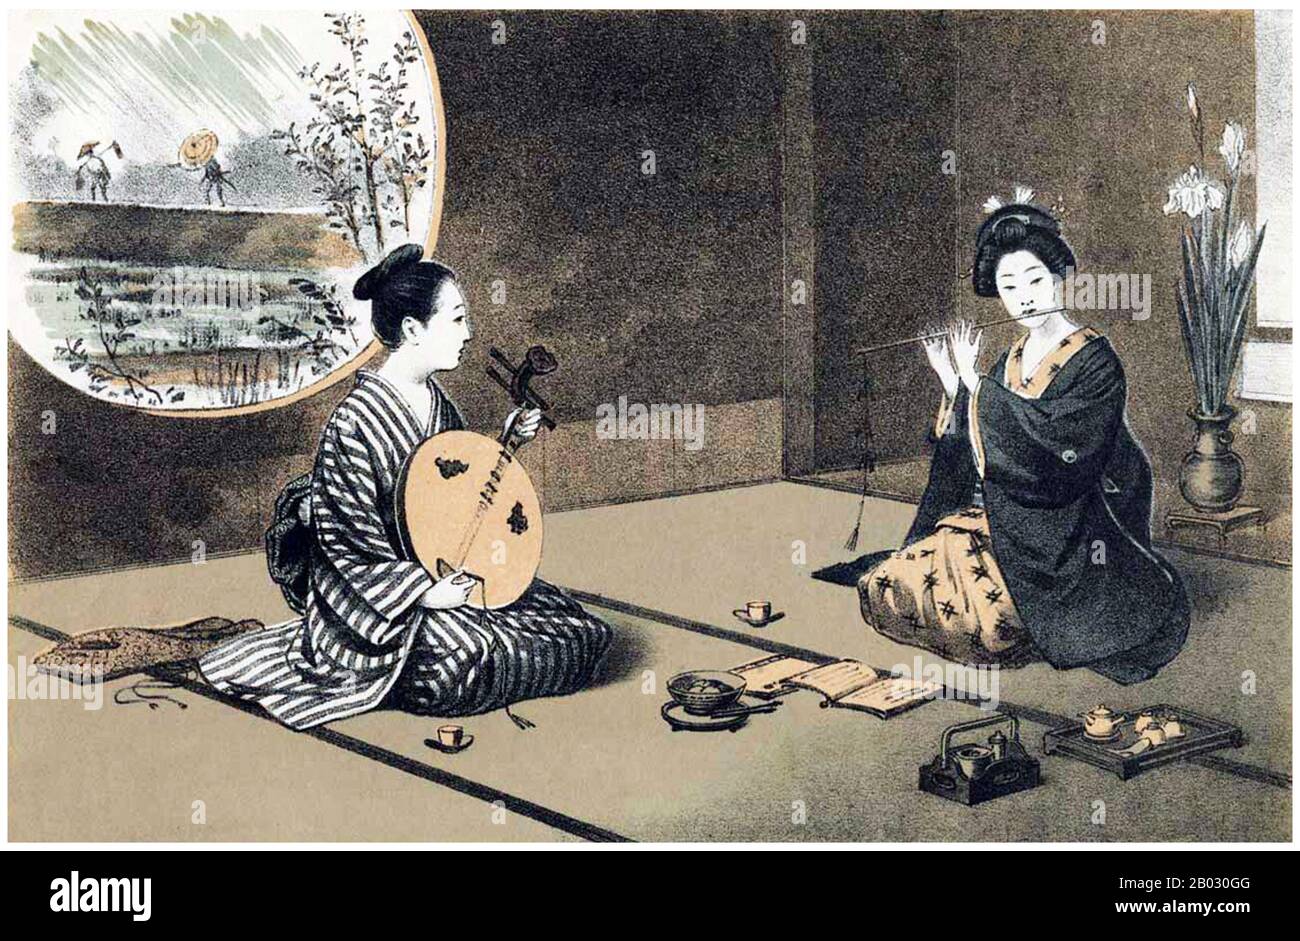 The musician on the left is playing a gekkin or Chinese lute (yueqin), while the one on the right is accompanying her with a kiyoshi fue or bamboo flute (Qingdi or 'Qing flute').  Both instruments are associated with Chinese Qing Dynasty music in traditional Japan. Stock Photo